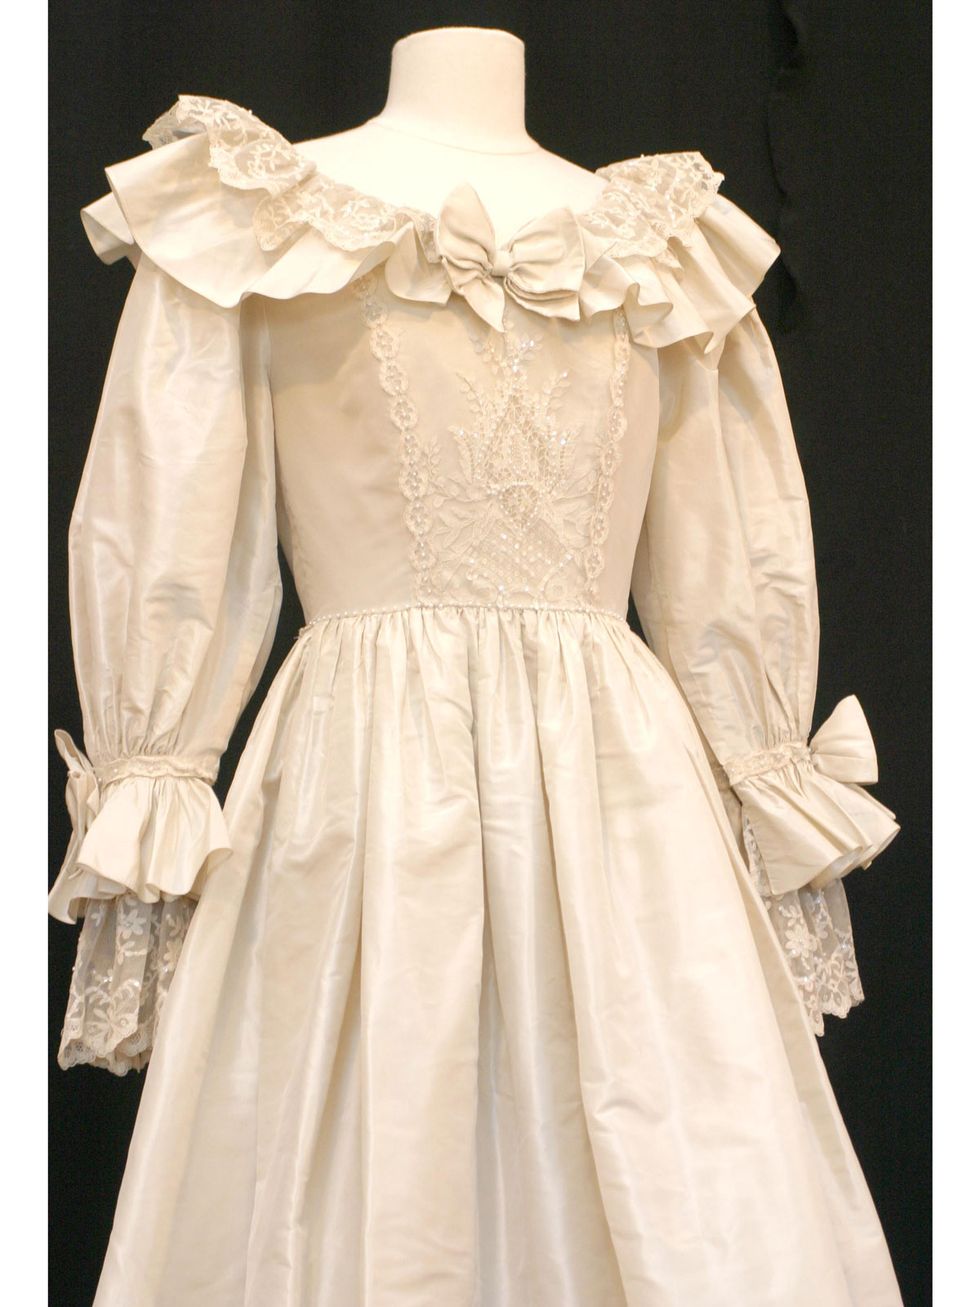 Clothing, Dress, White, Victorian fashion, Ruffle, Gown, Day dress, Sleeve, Outerwear, Shoulder, 